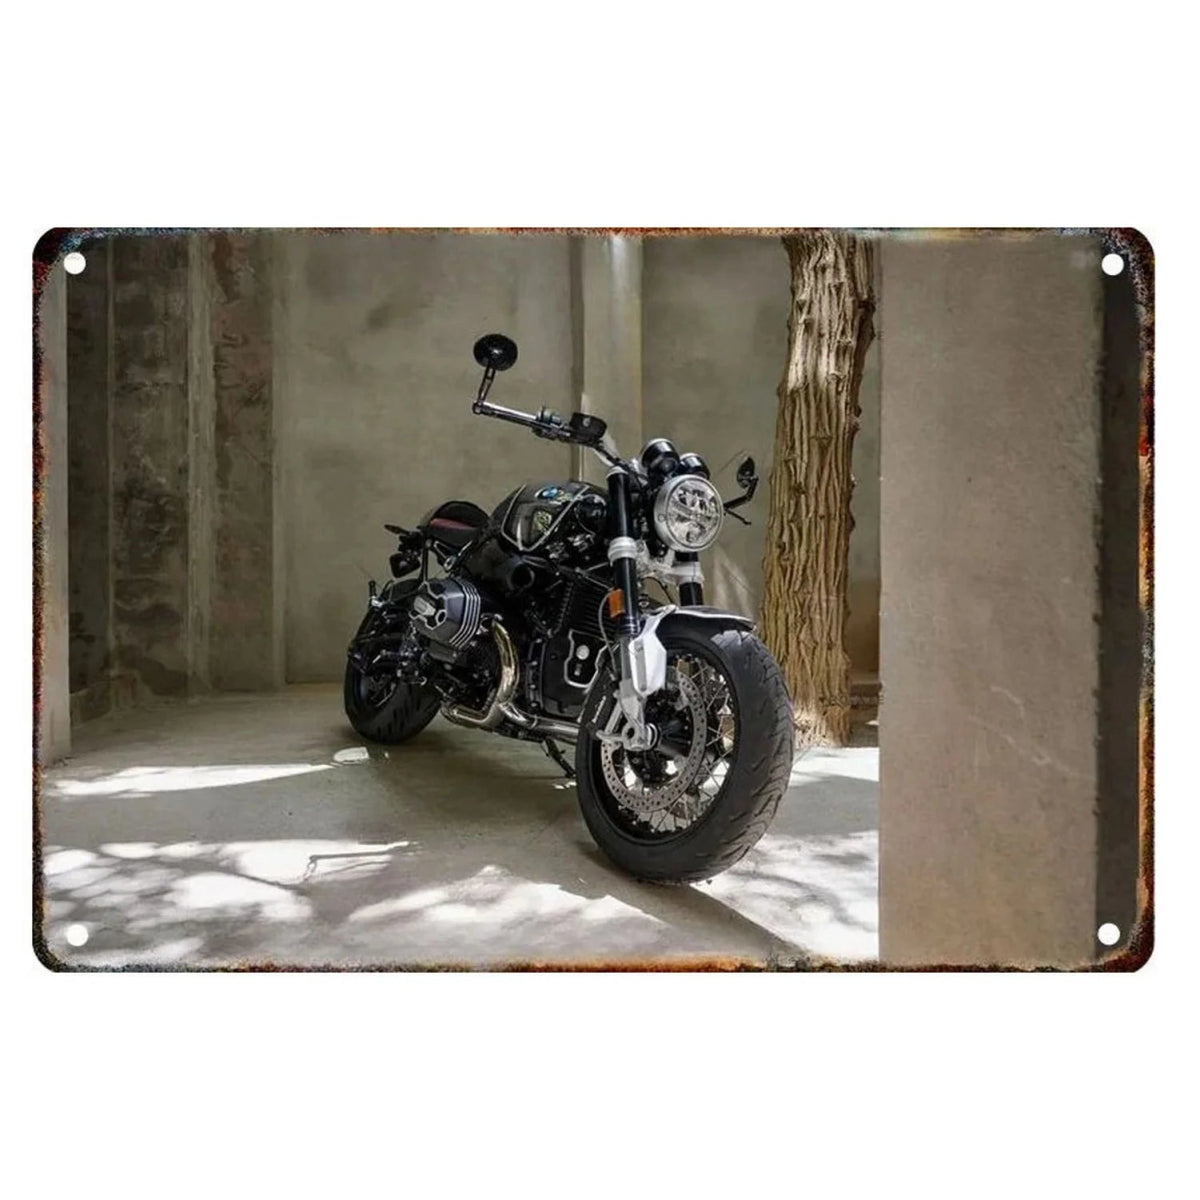 Metal Tin Signs Plaque Classic Motorcycles Wall Decoration Vintage Posters Iron Painting for Man Cave Home Cafe Garden Club Bar